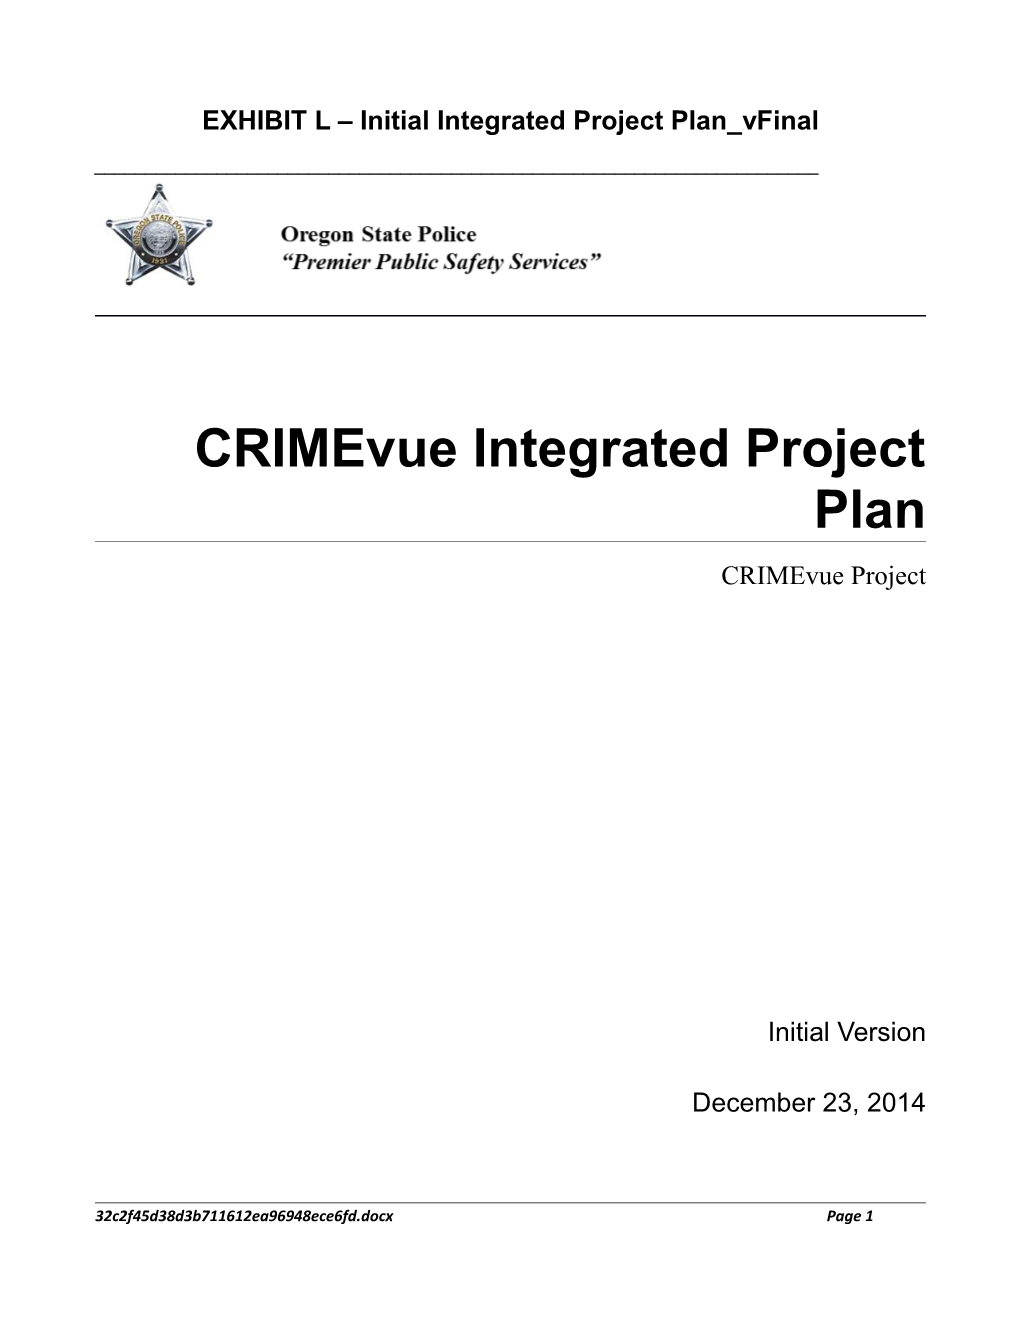 Crimevue Integrated Project Plan